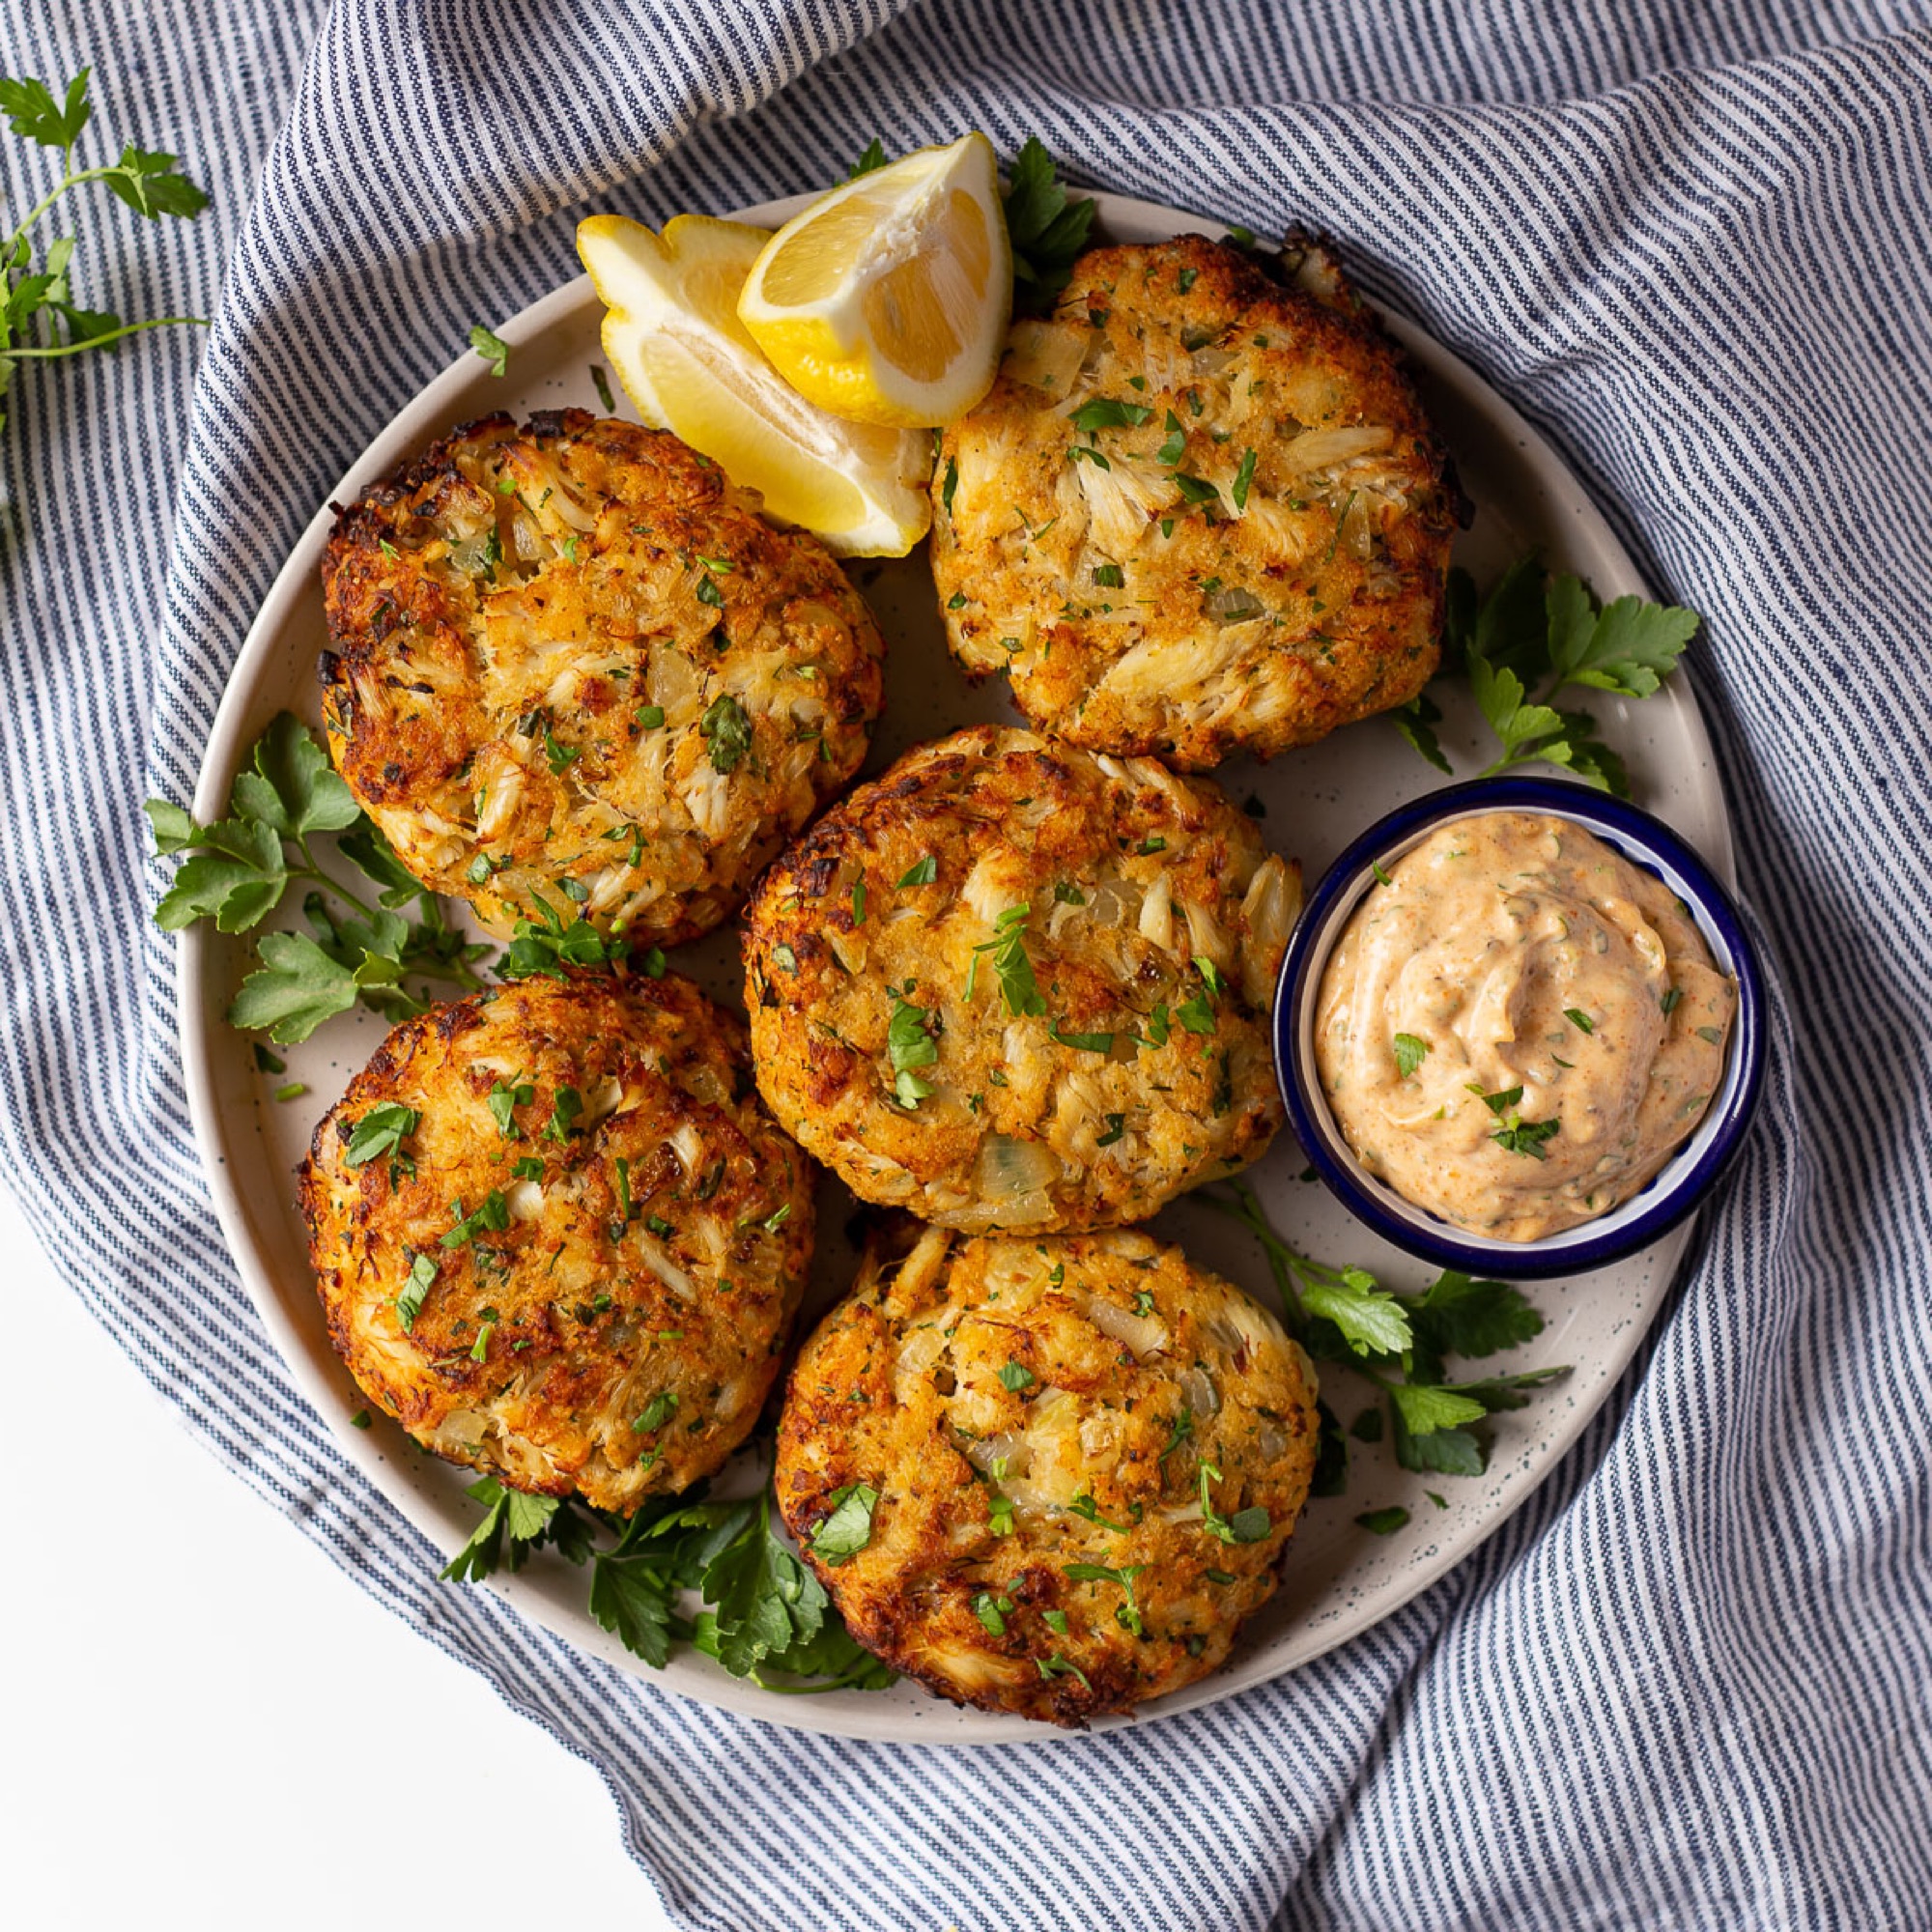 Old Bay Crab Cakes Recipe Easy and Amazing